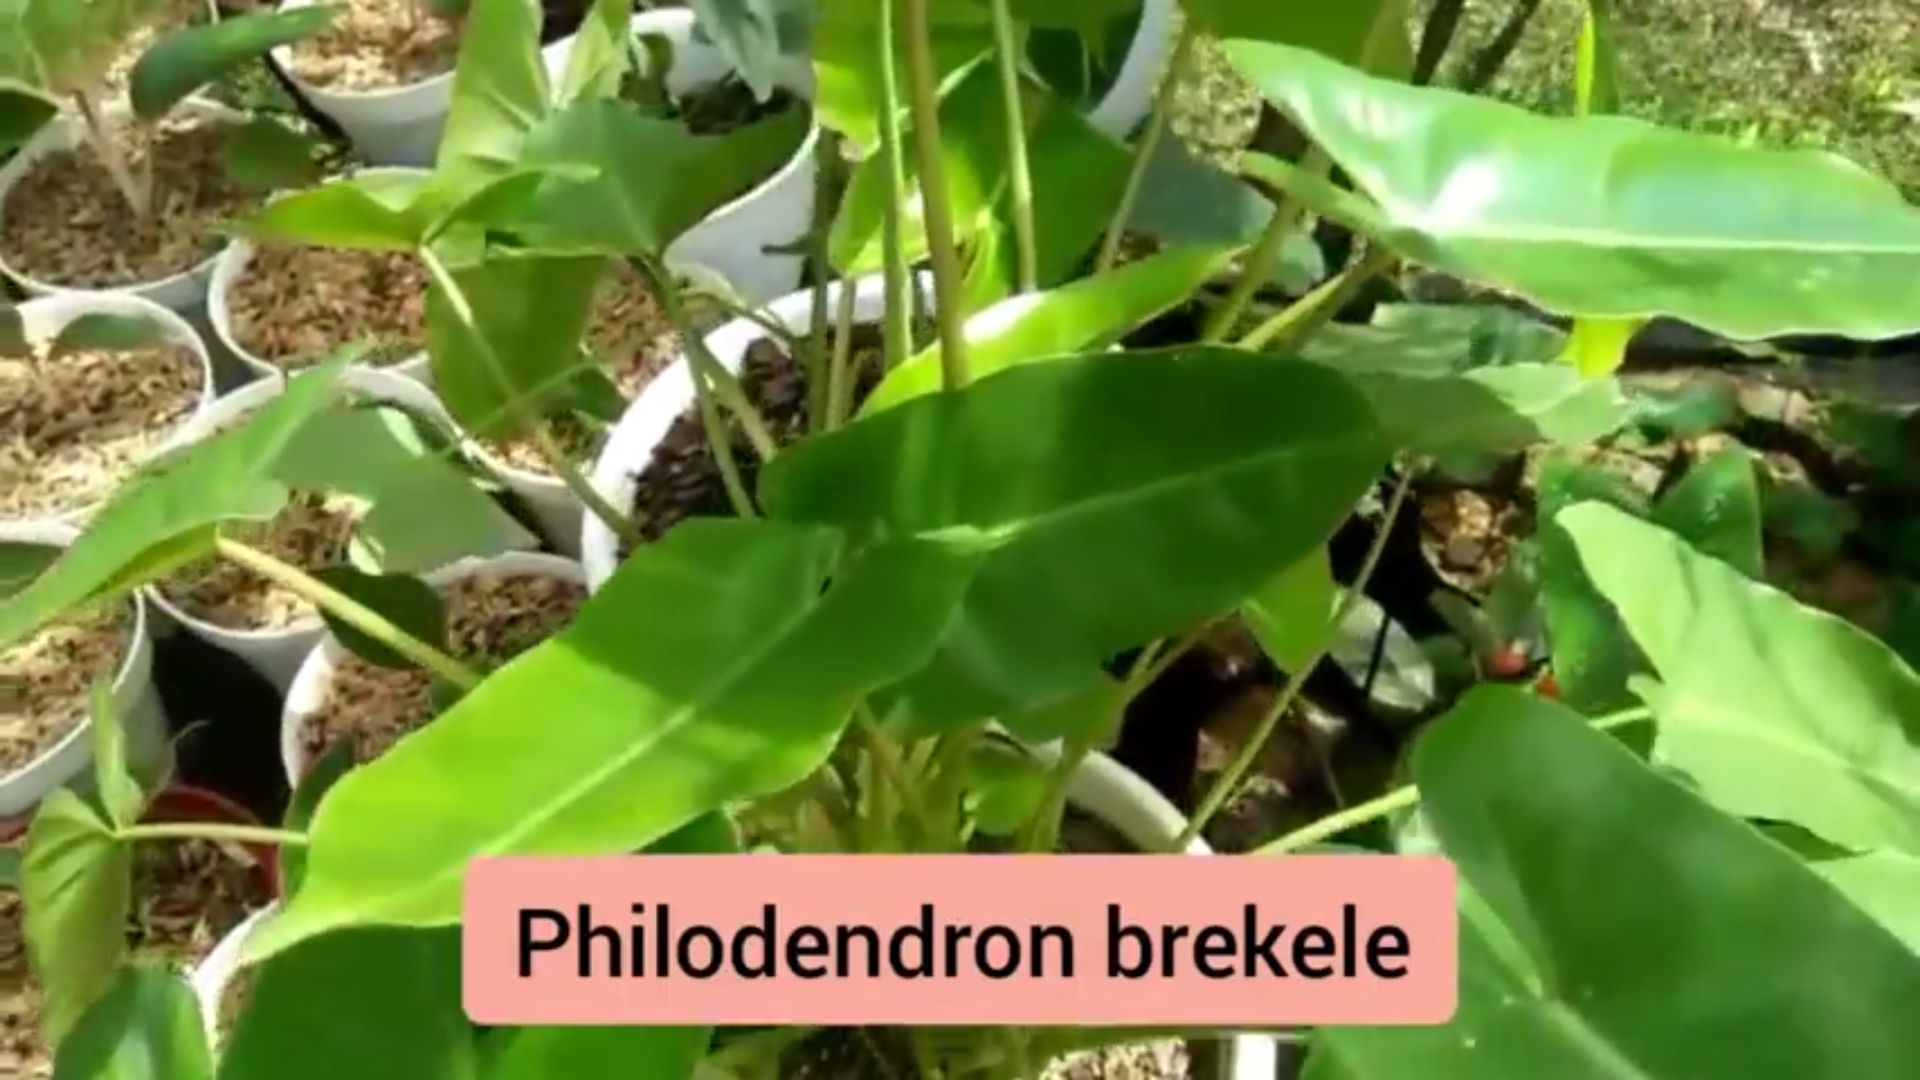 Philodendron brekele